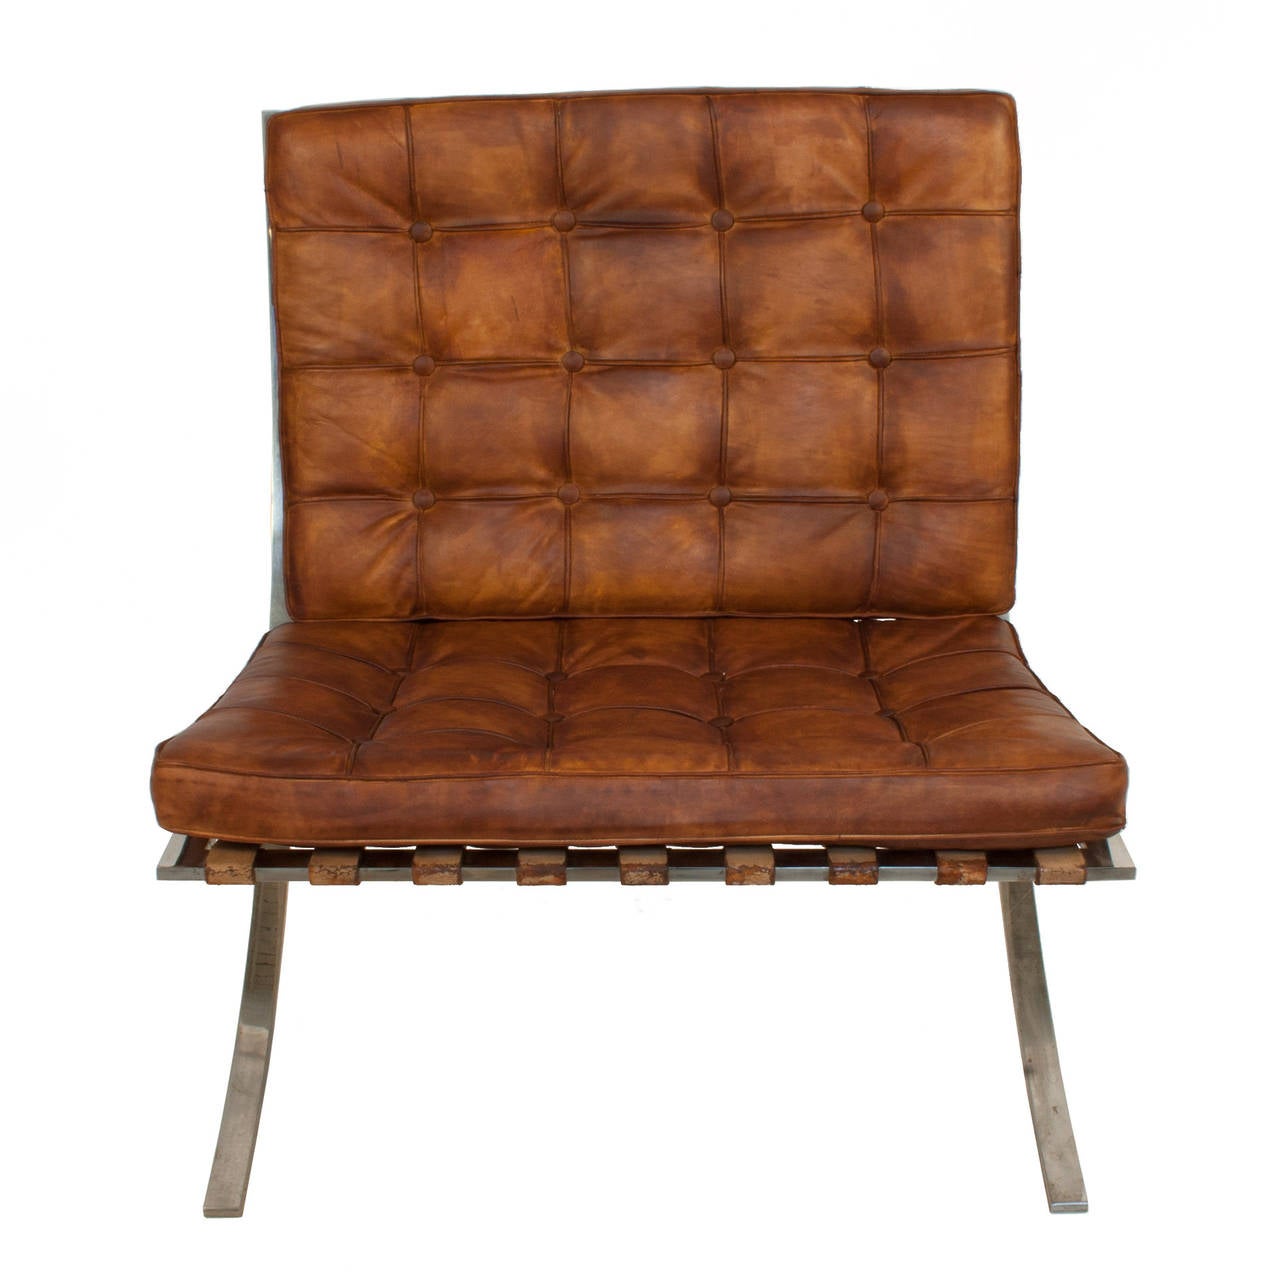 Barcelona chair by Ludwig Mies van der Rohe. Leather cushions have been upholstered at a time after the chair was made.